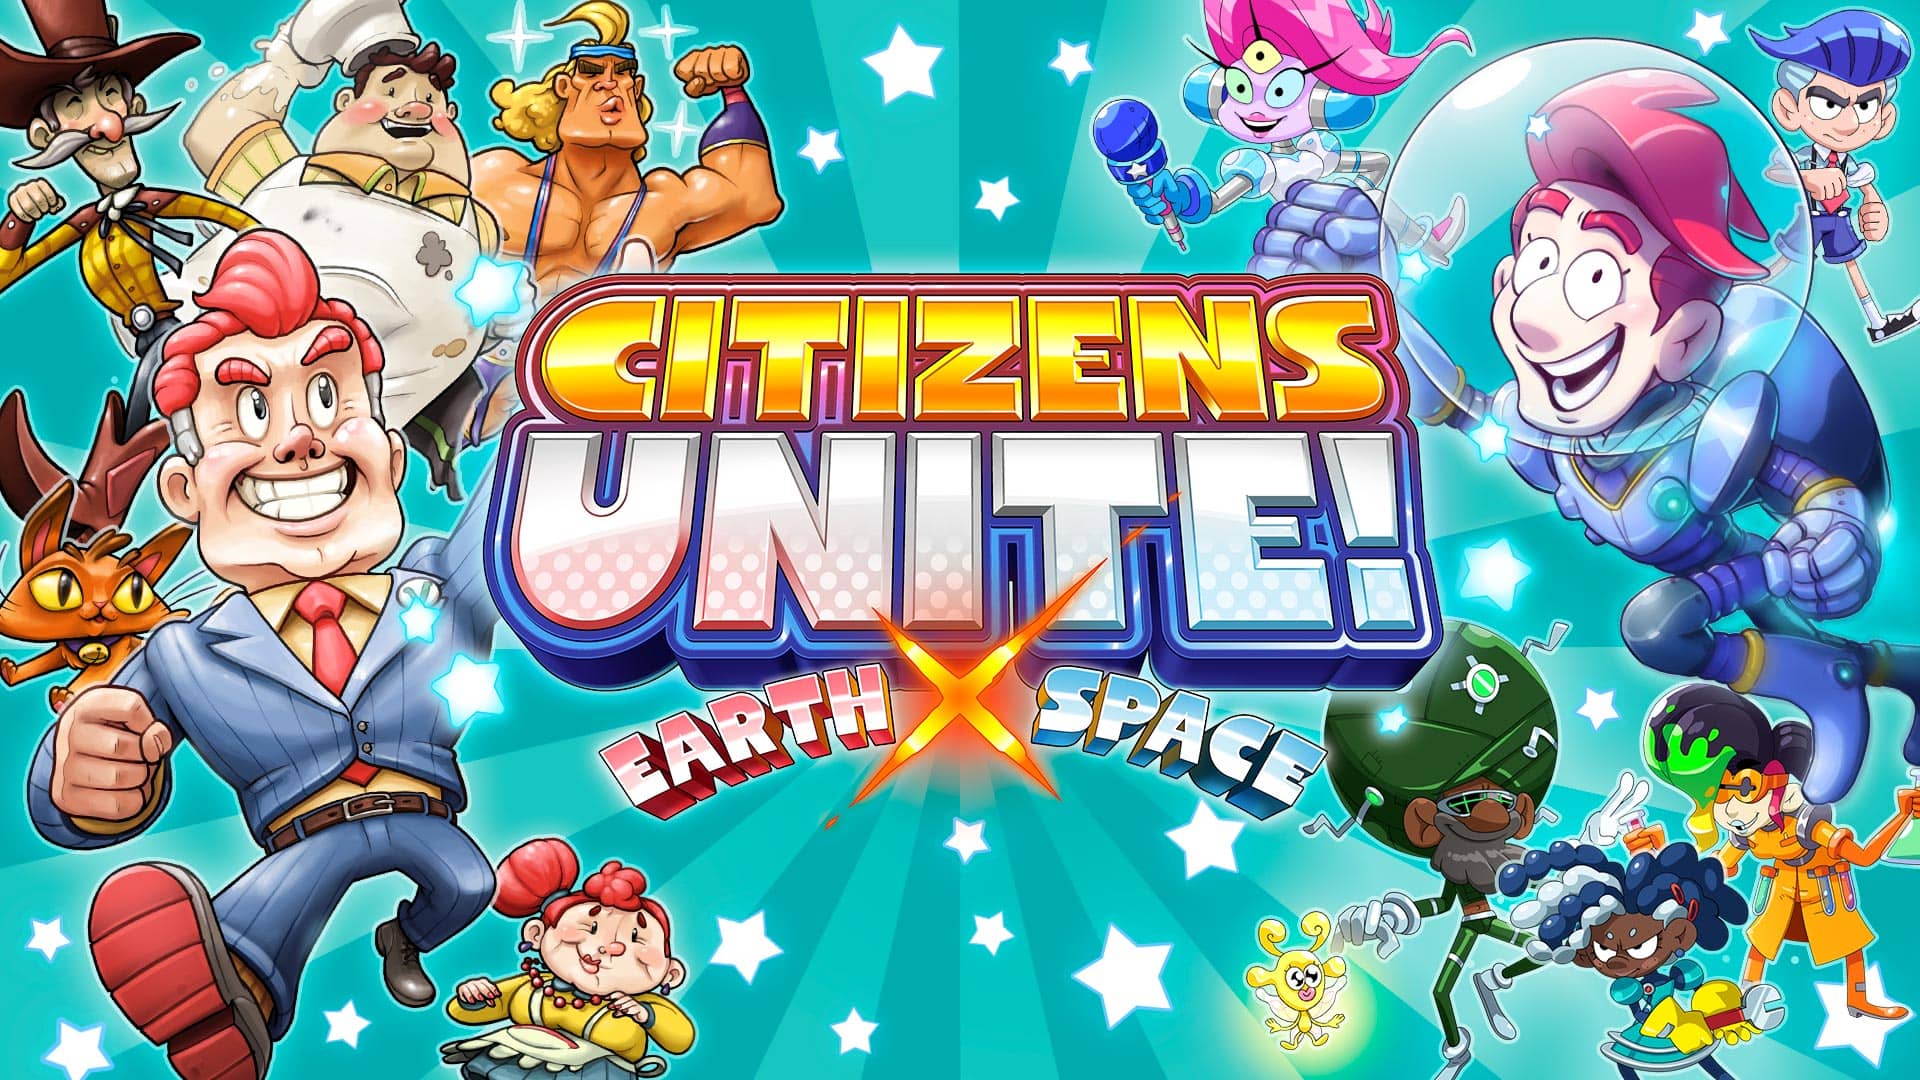 Read more about the article Citizens Unite!: Earth x Space